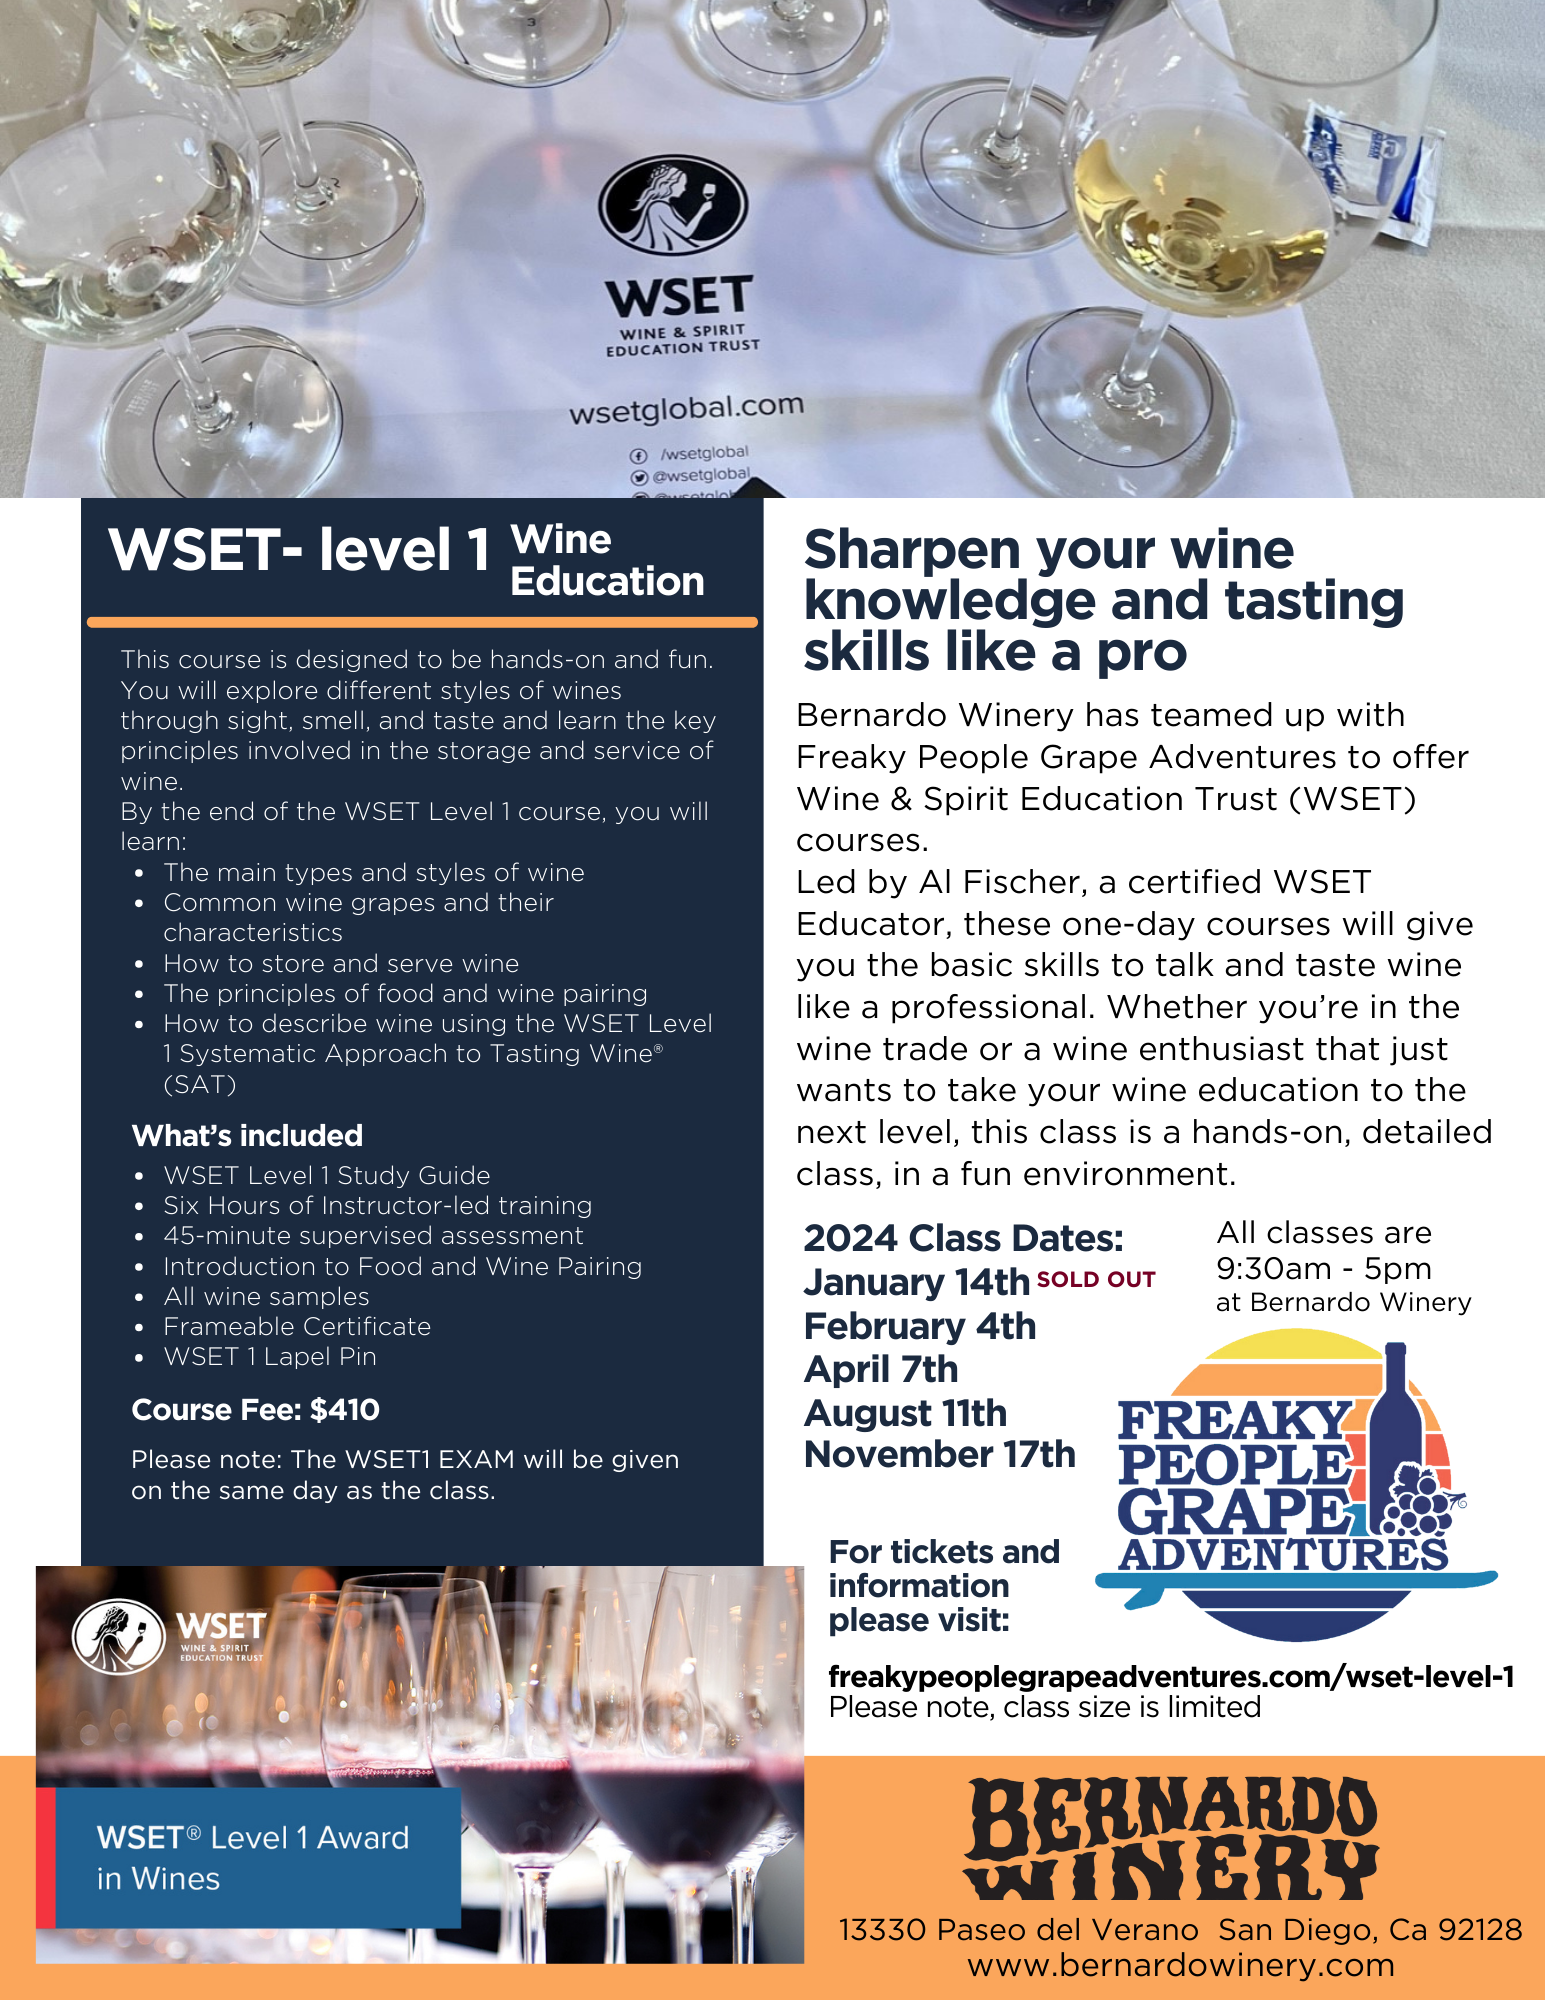 WSET LEVEL 1 and 2 - WINE EDUCATION COURSES WITH AL FISCHER – Bernardo  Winery